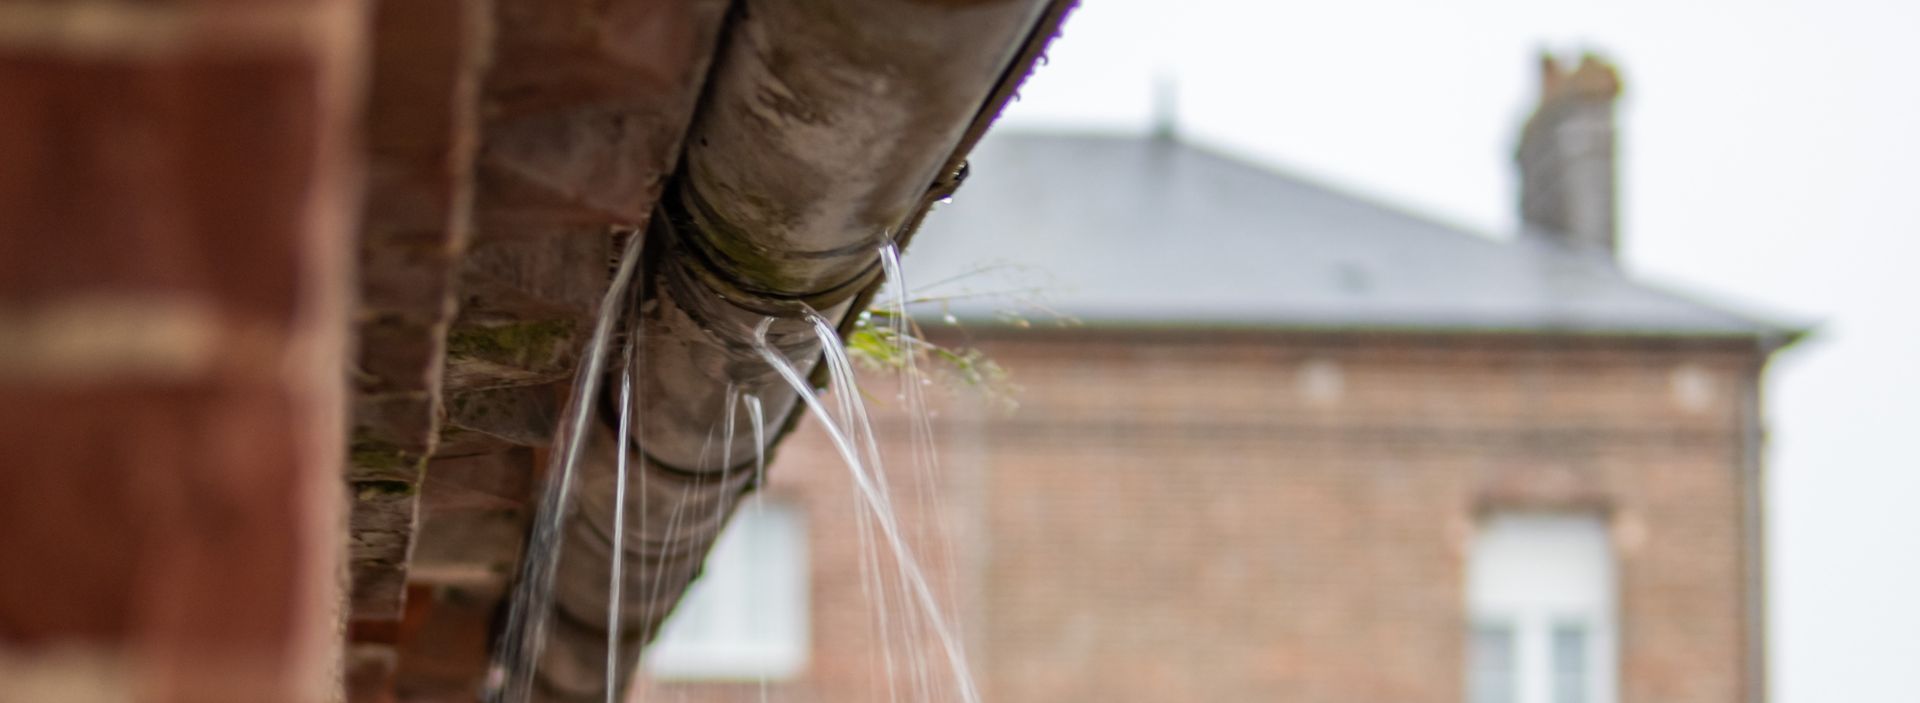 Hedon Exterior Cleaning | Your gutter cleaning experts in Hull, East Yorkshire